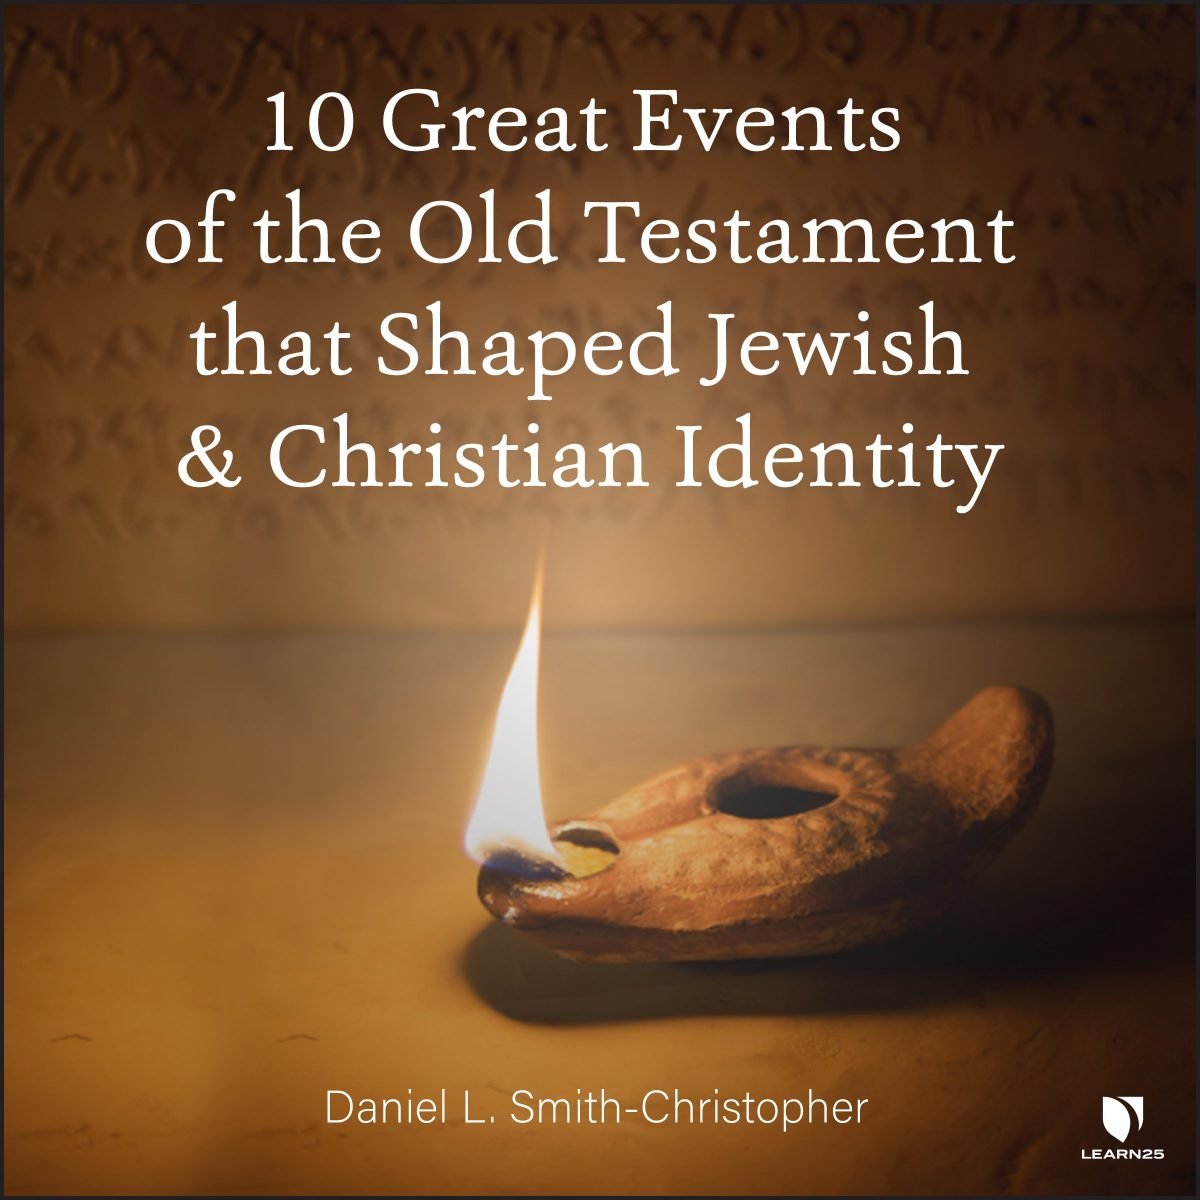 10 Great Events of the Old Testament that Shaped Jewish and Christian